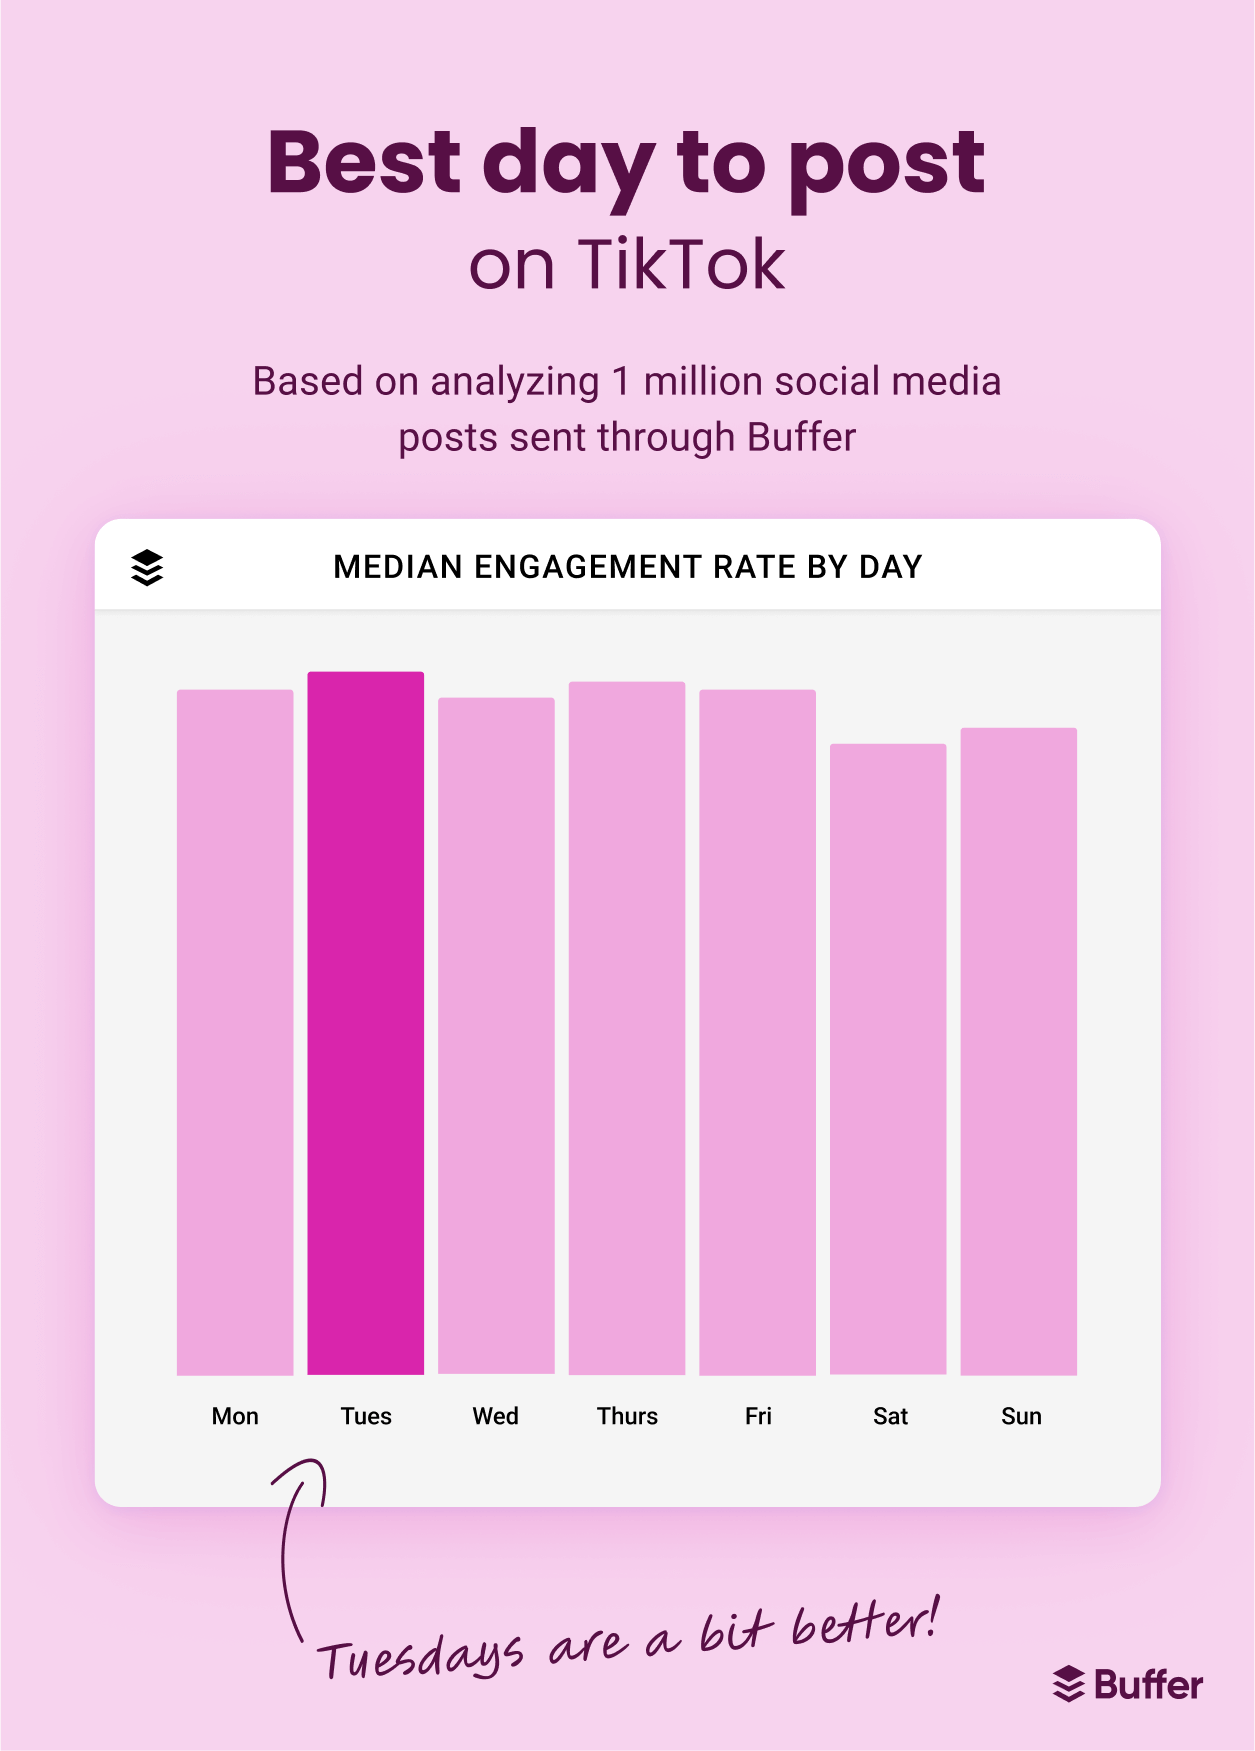 A graph showing the best days of the week to post on TikTok